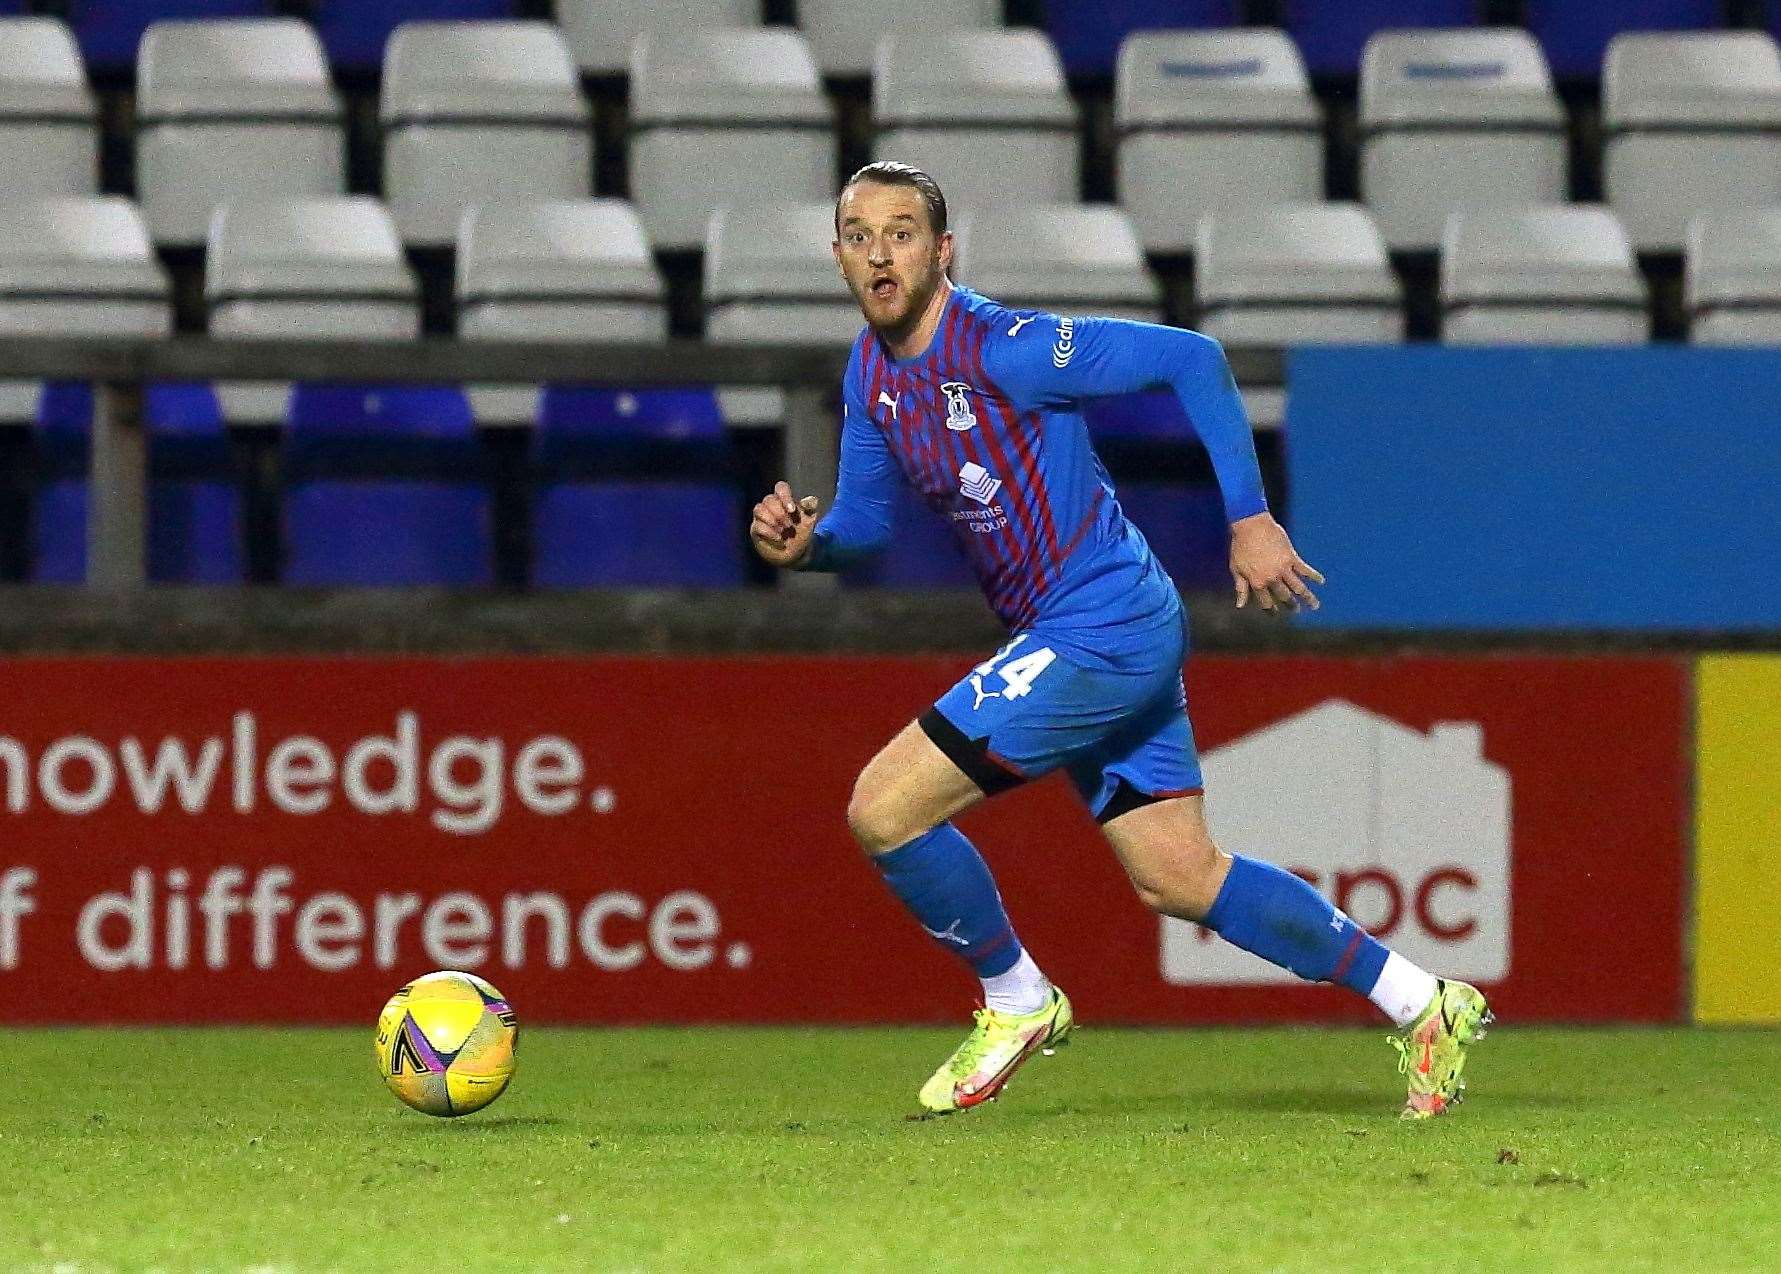 Tom Walsh starred as Caley Thistle thrashed Hamilton in Inverness. Picture: Ken Macpherson